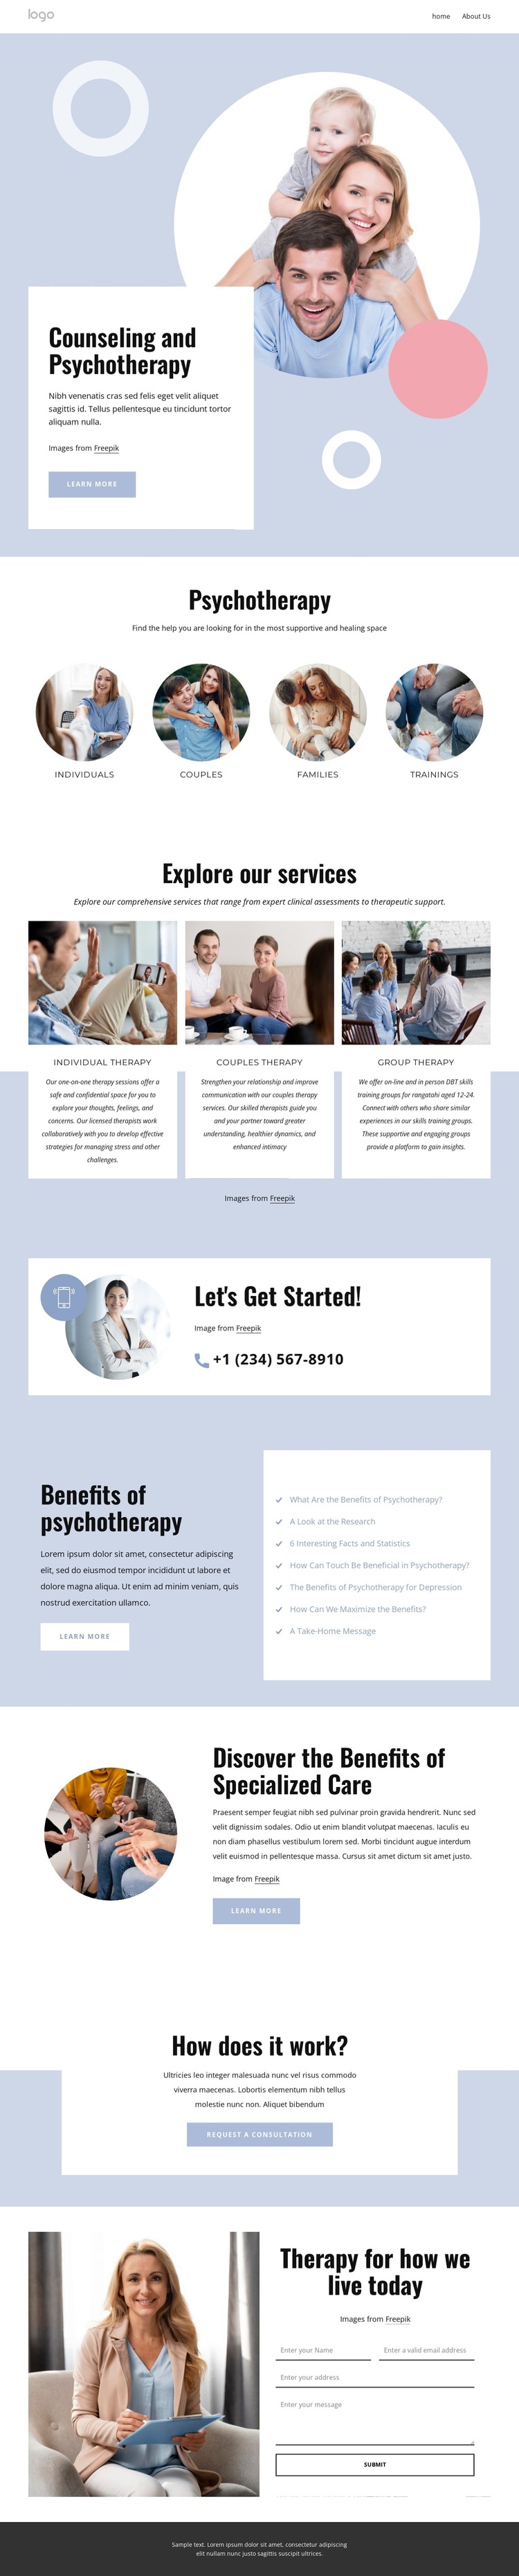 Counseling and psychotherapy Joomla Page Builder